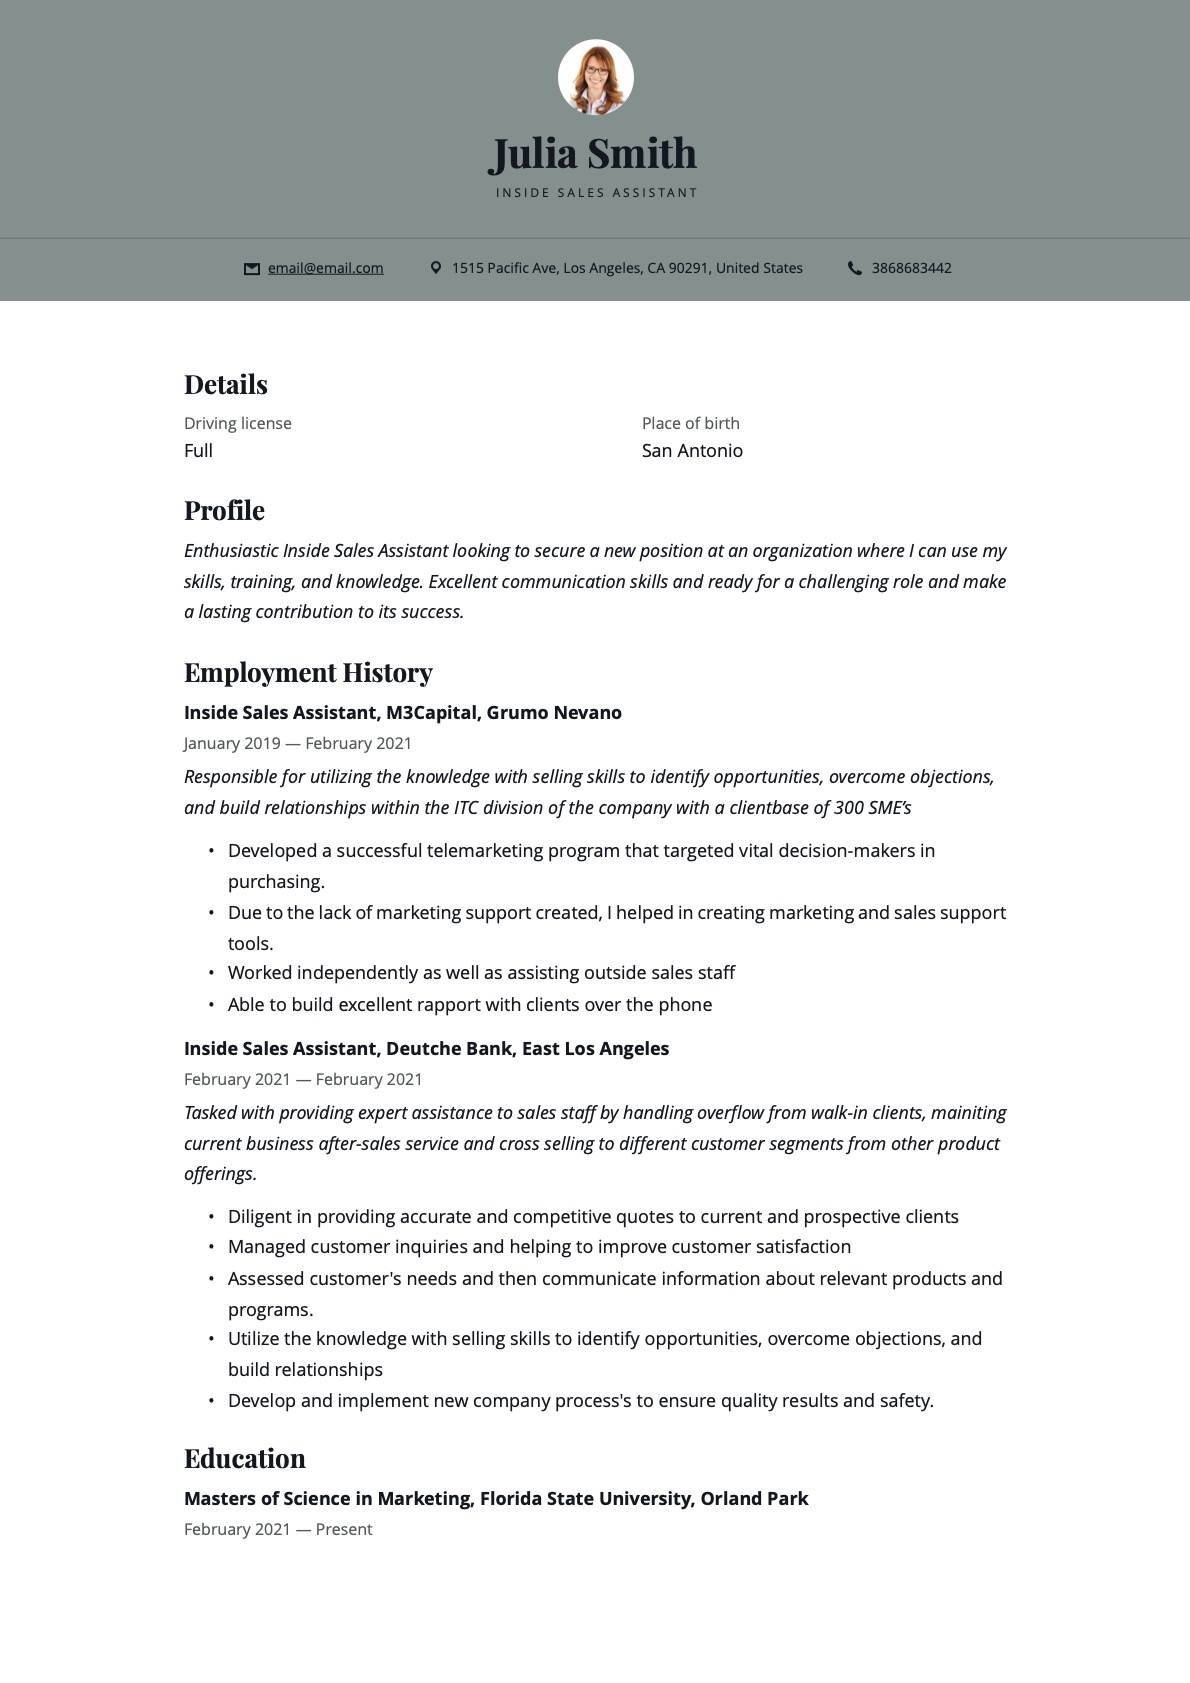 Example Resume Inside Sales Assistant-12